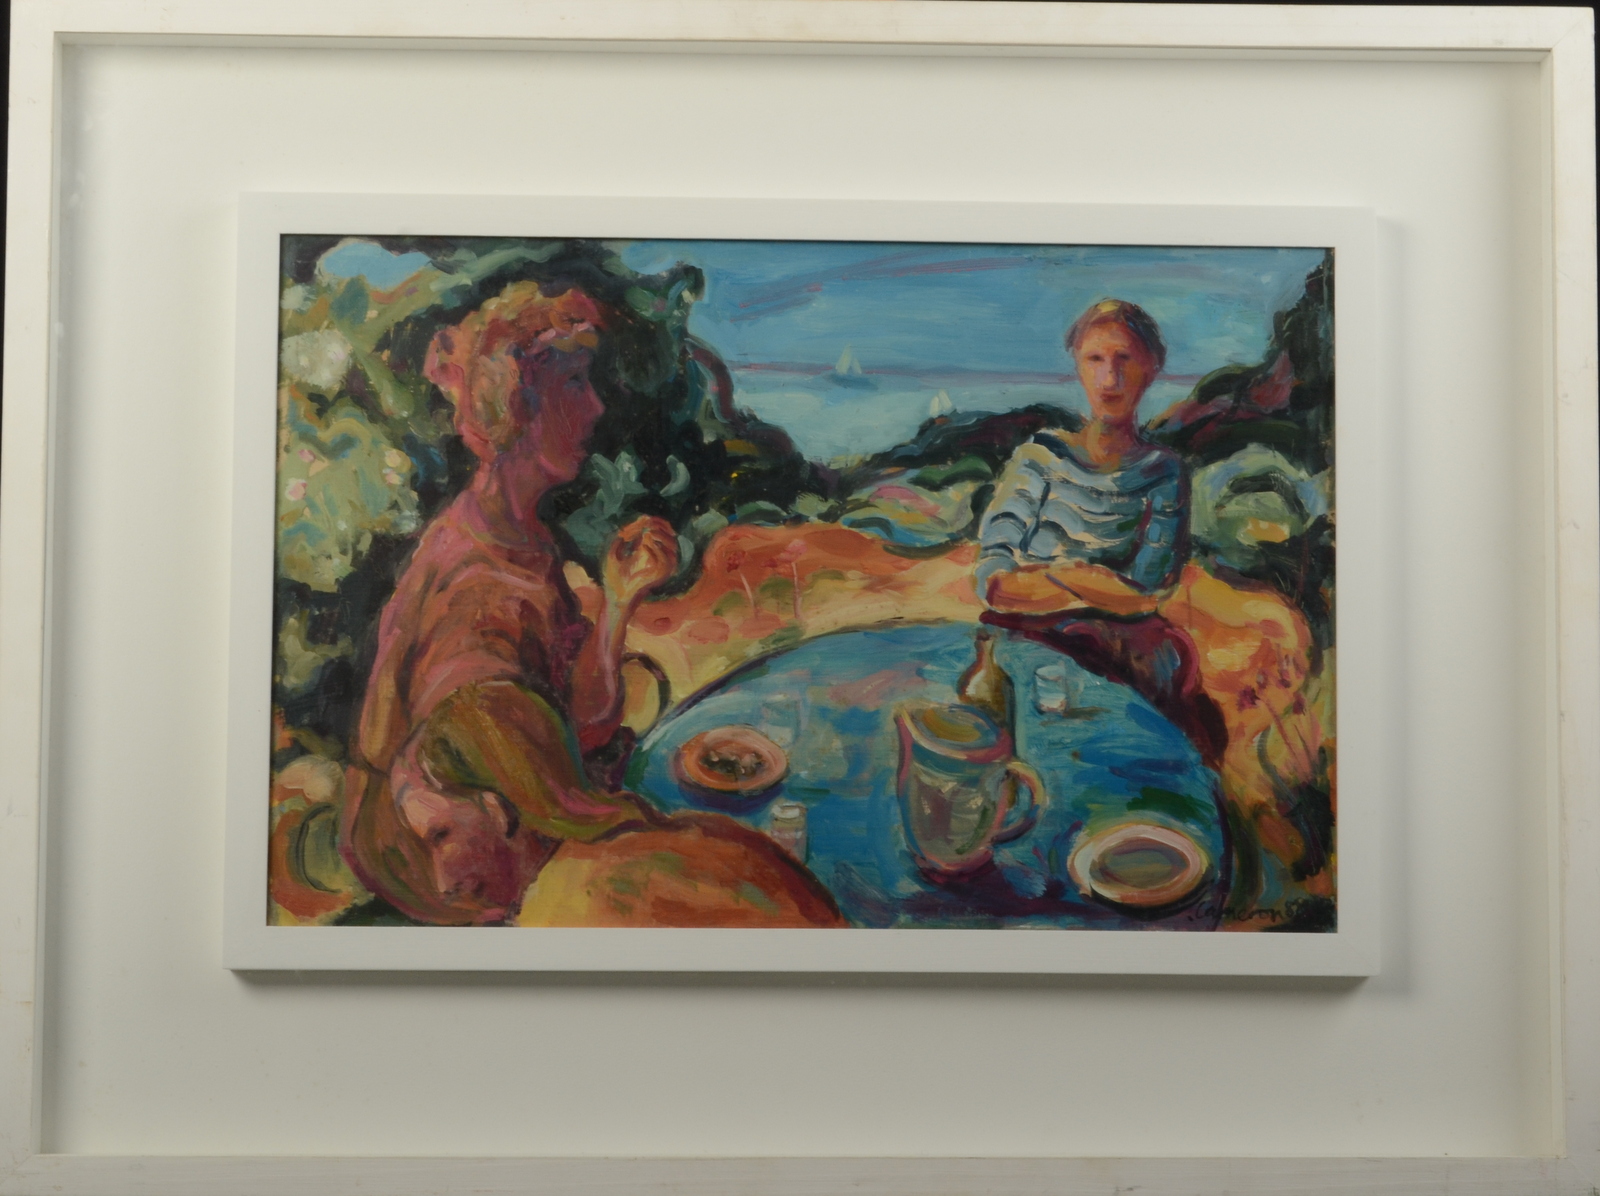 ZOE CAMERON Afternoon Tea Oil on board Signed and dated '88 35 x 54cm - Image 2 of 2